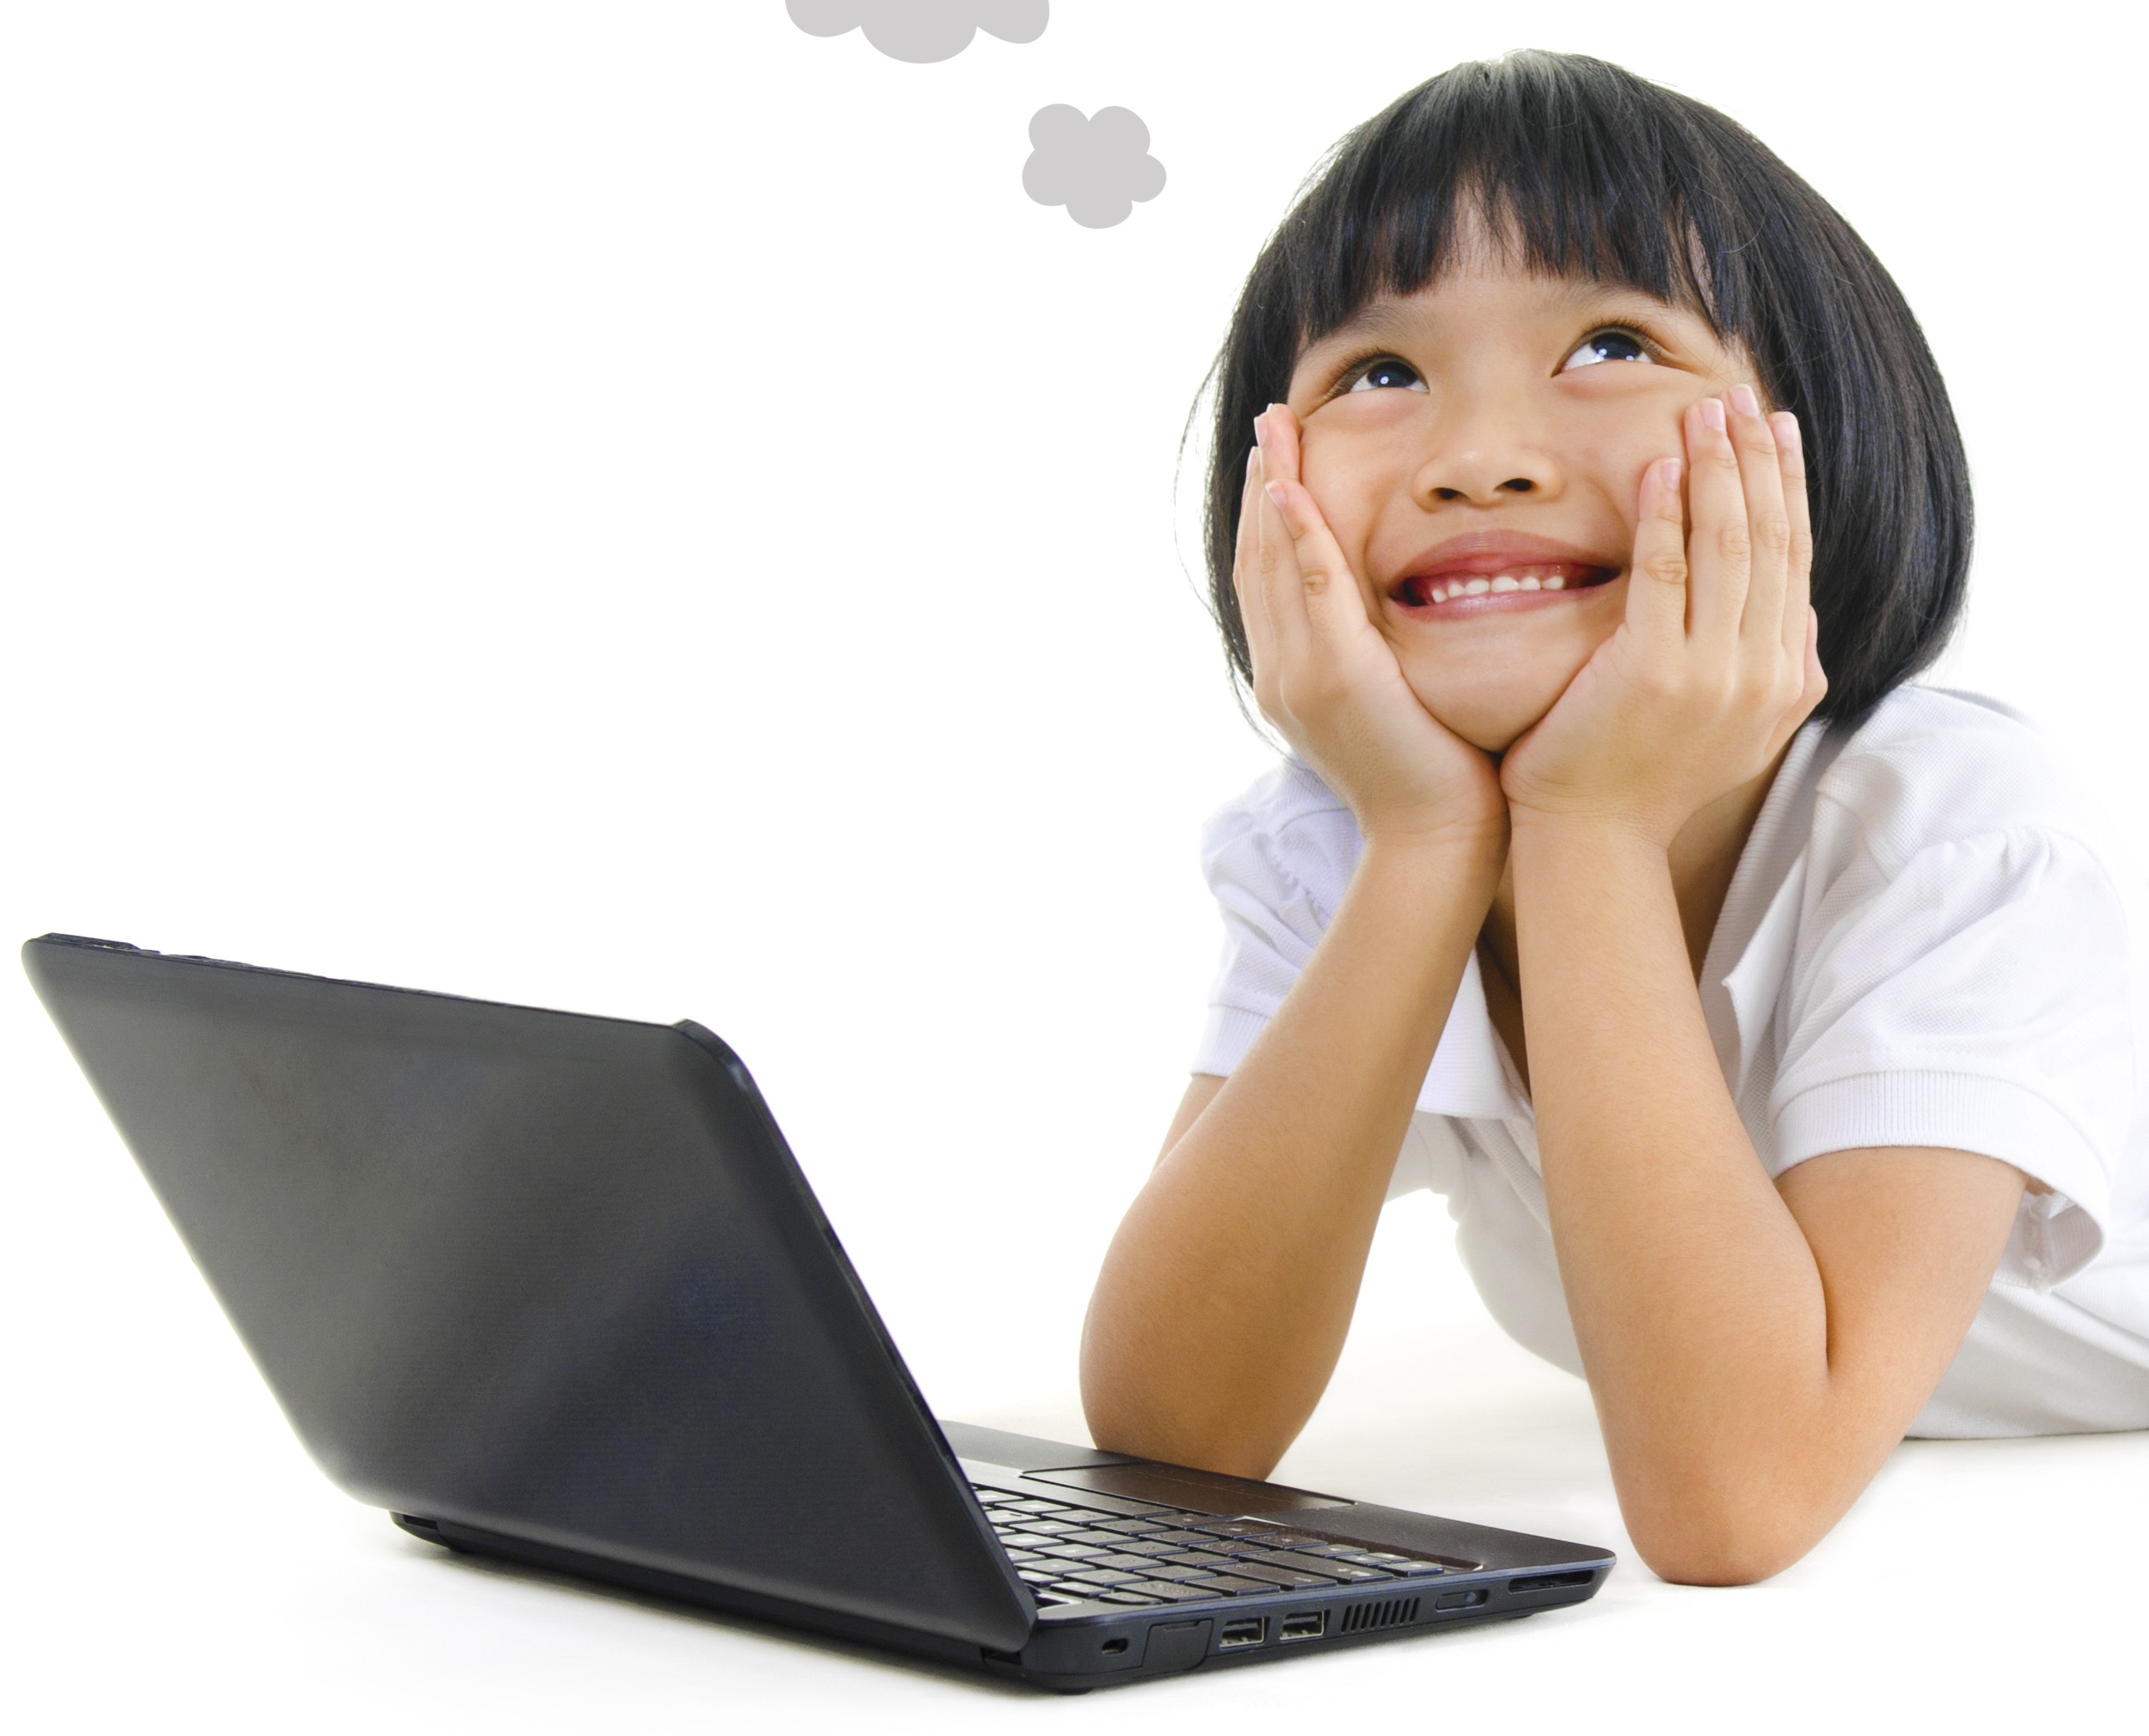 Pan Asian school girl using laptop and looking up